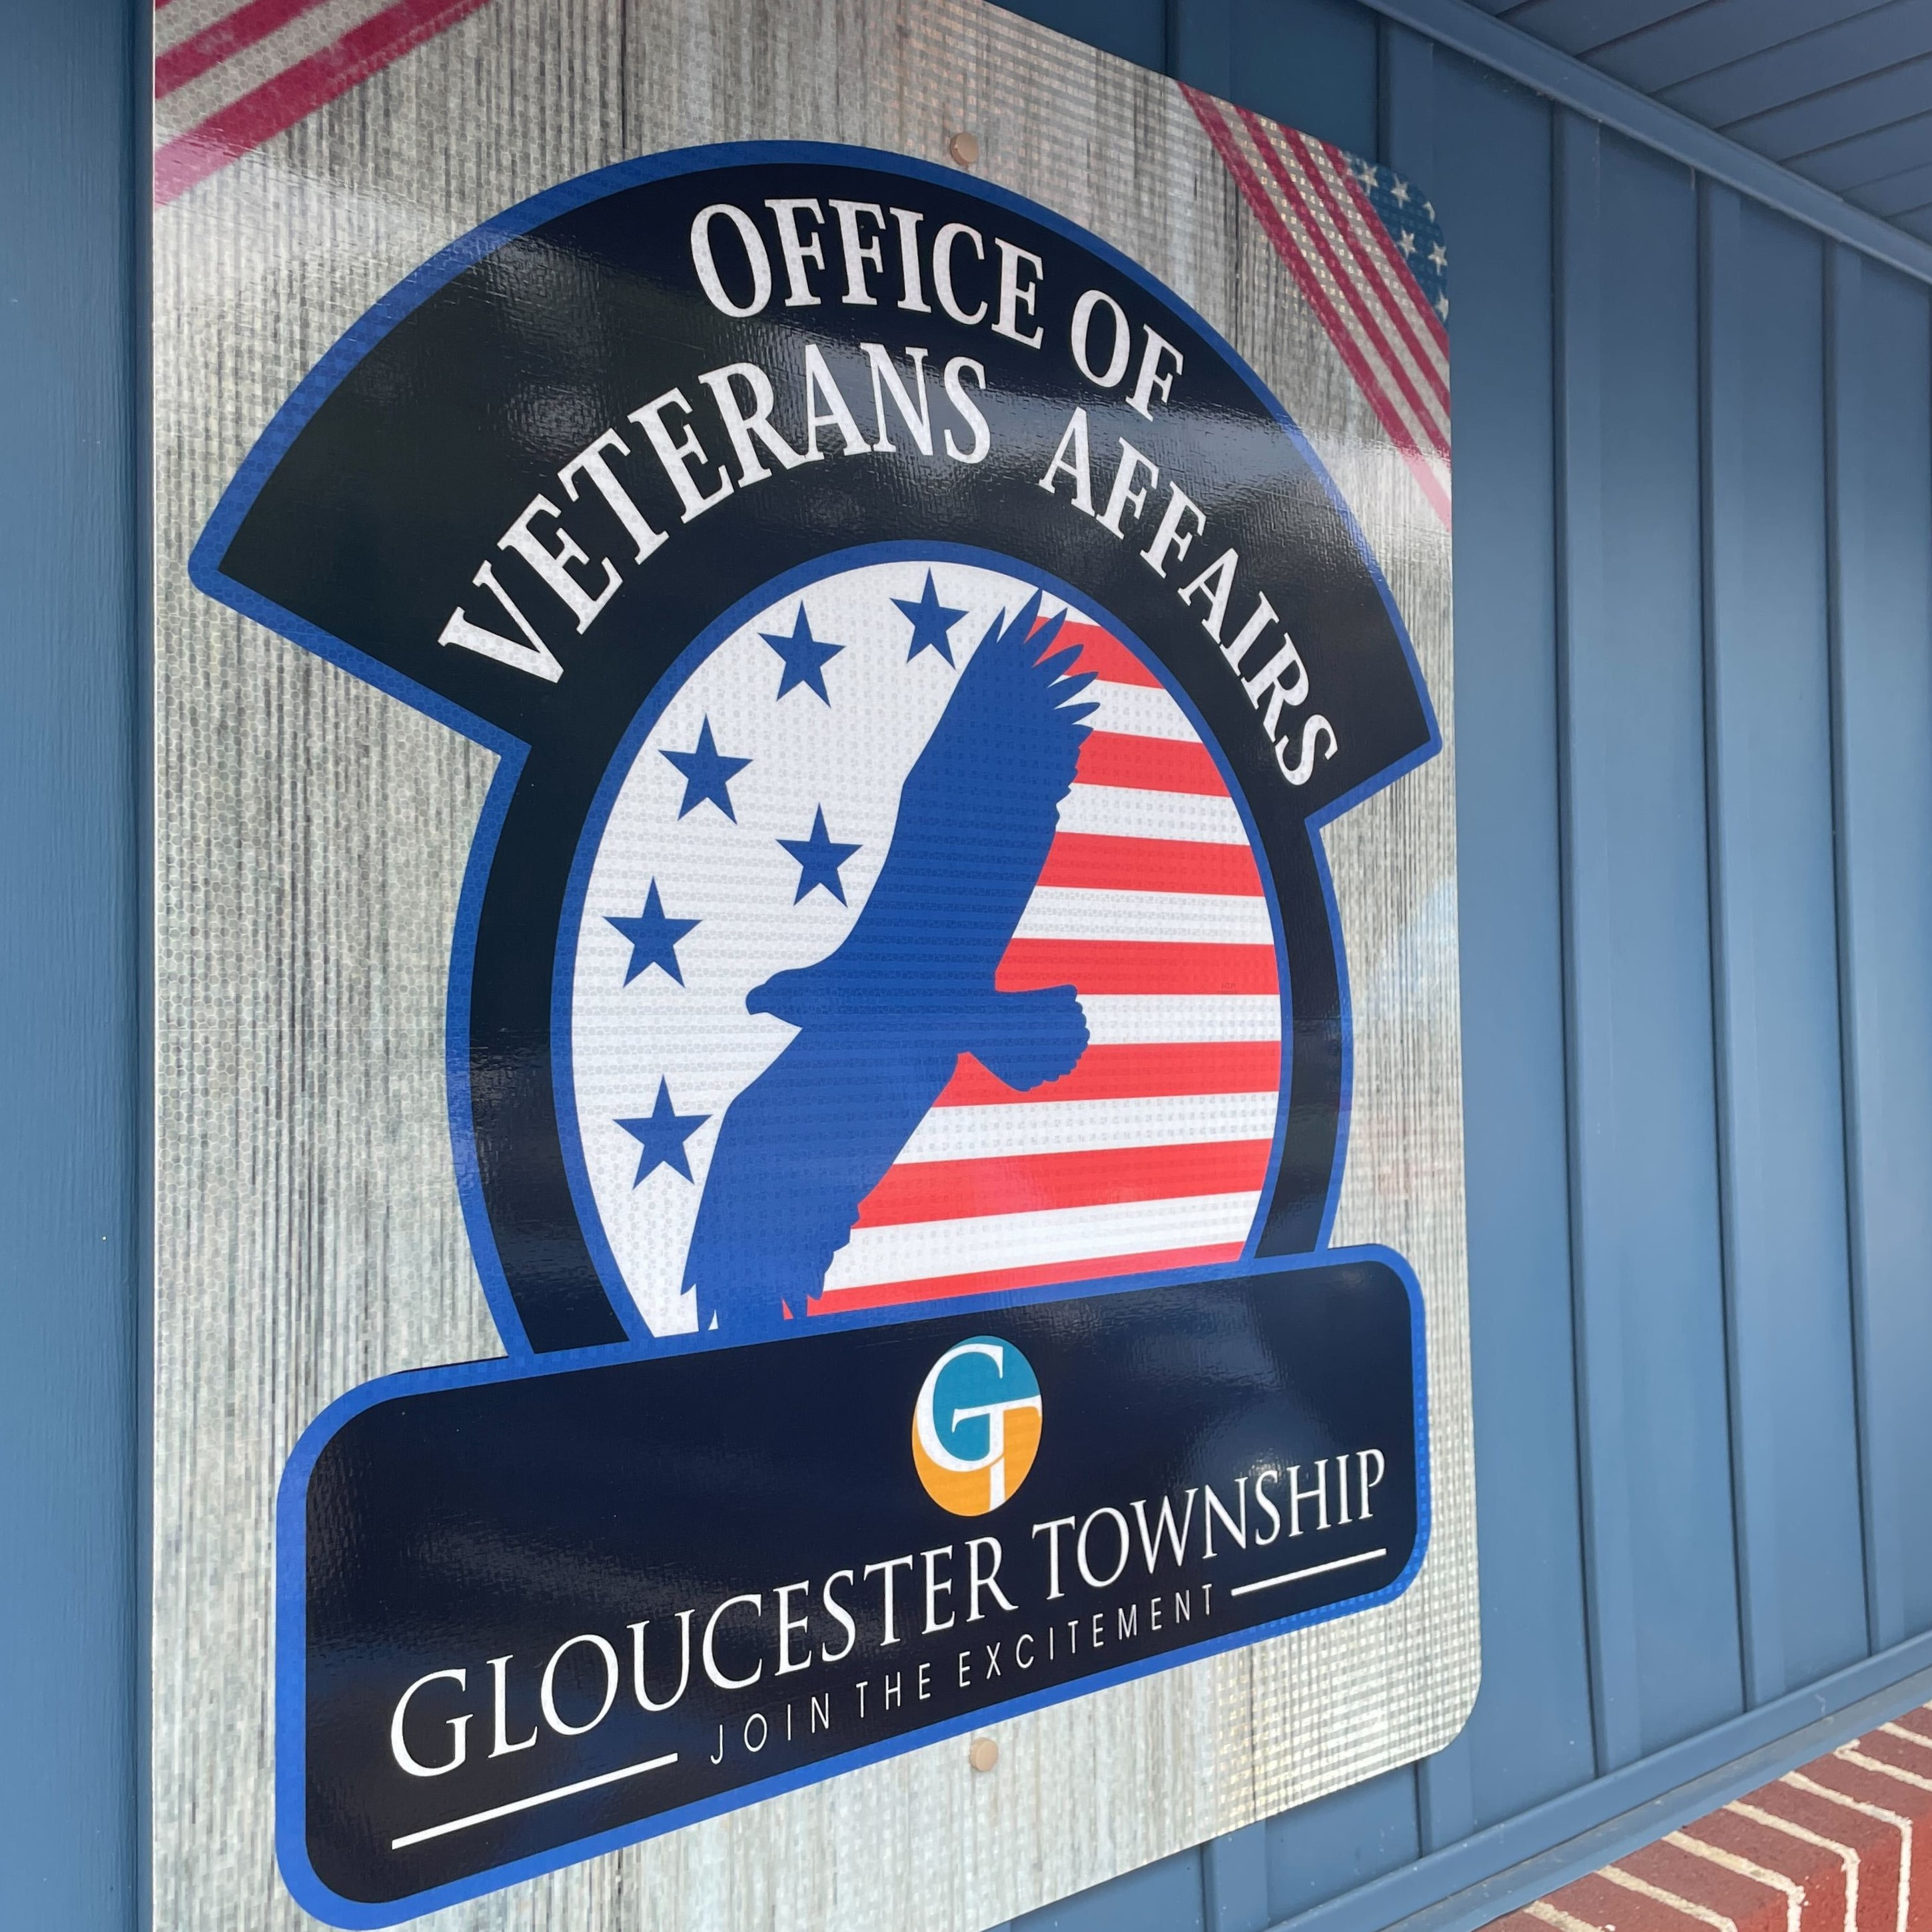 New Gloucester Township Veterans Affairs office brings welcome resources to area vets